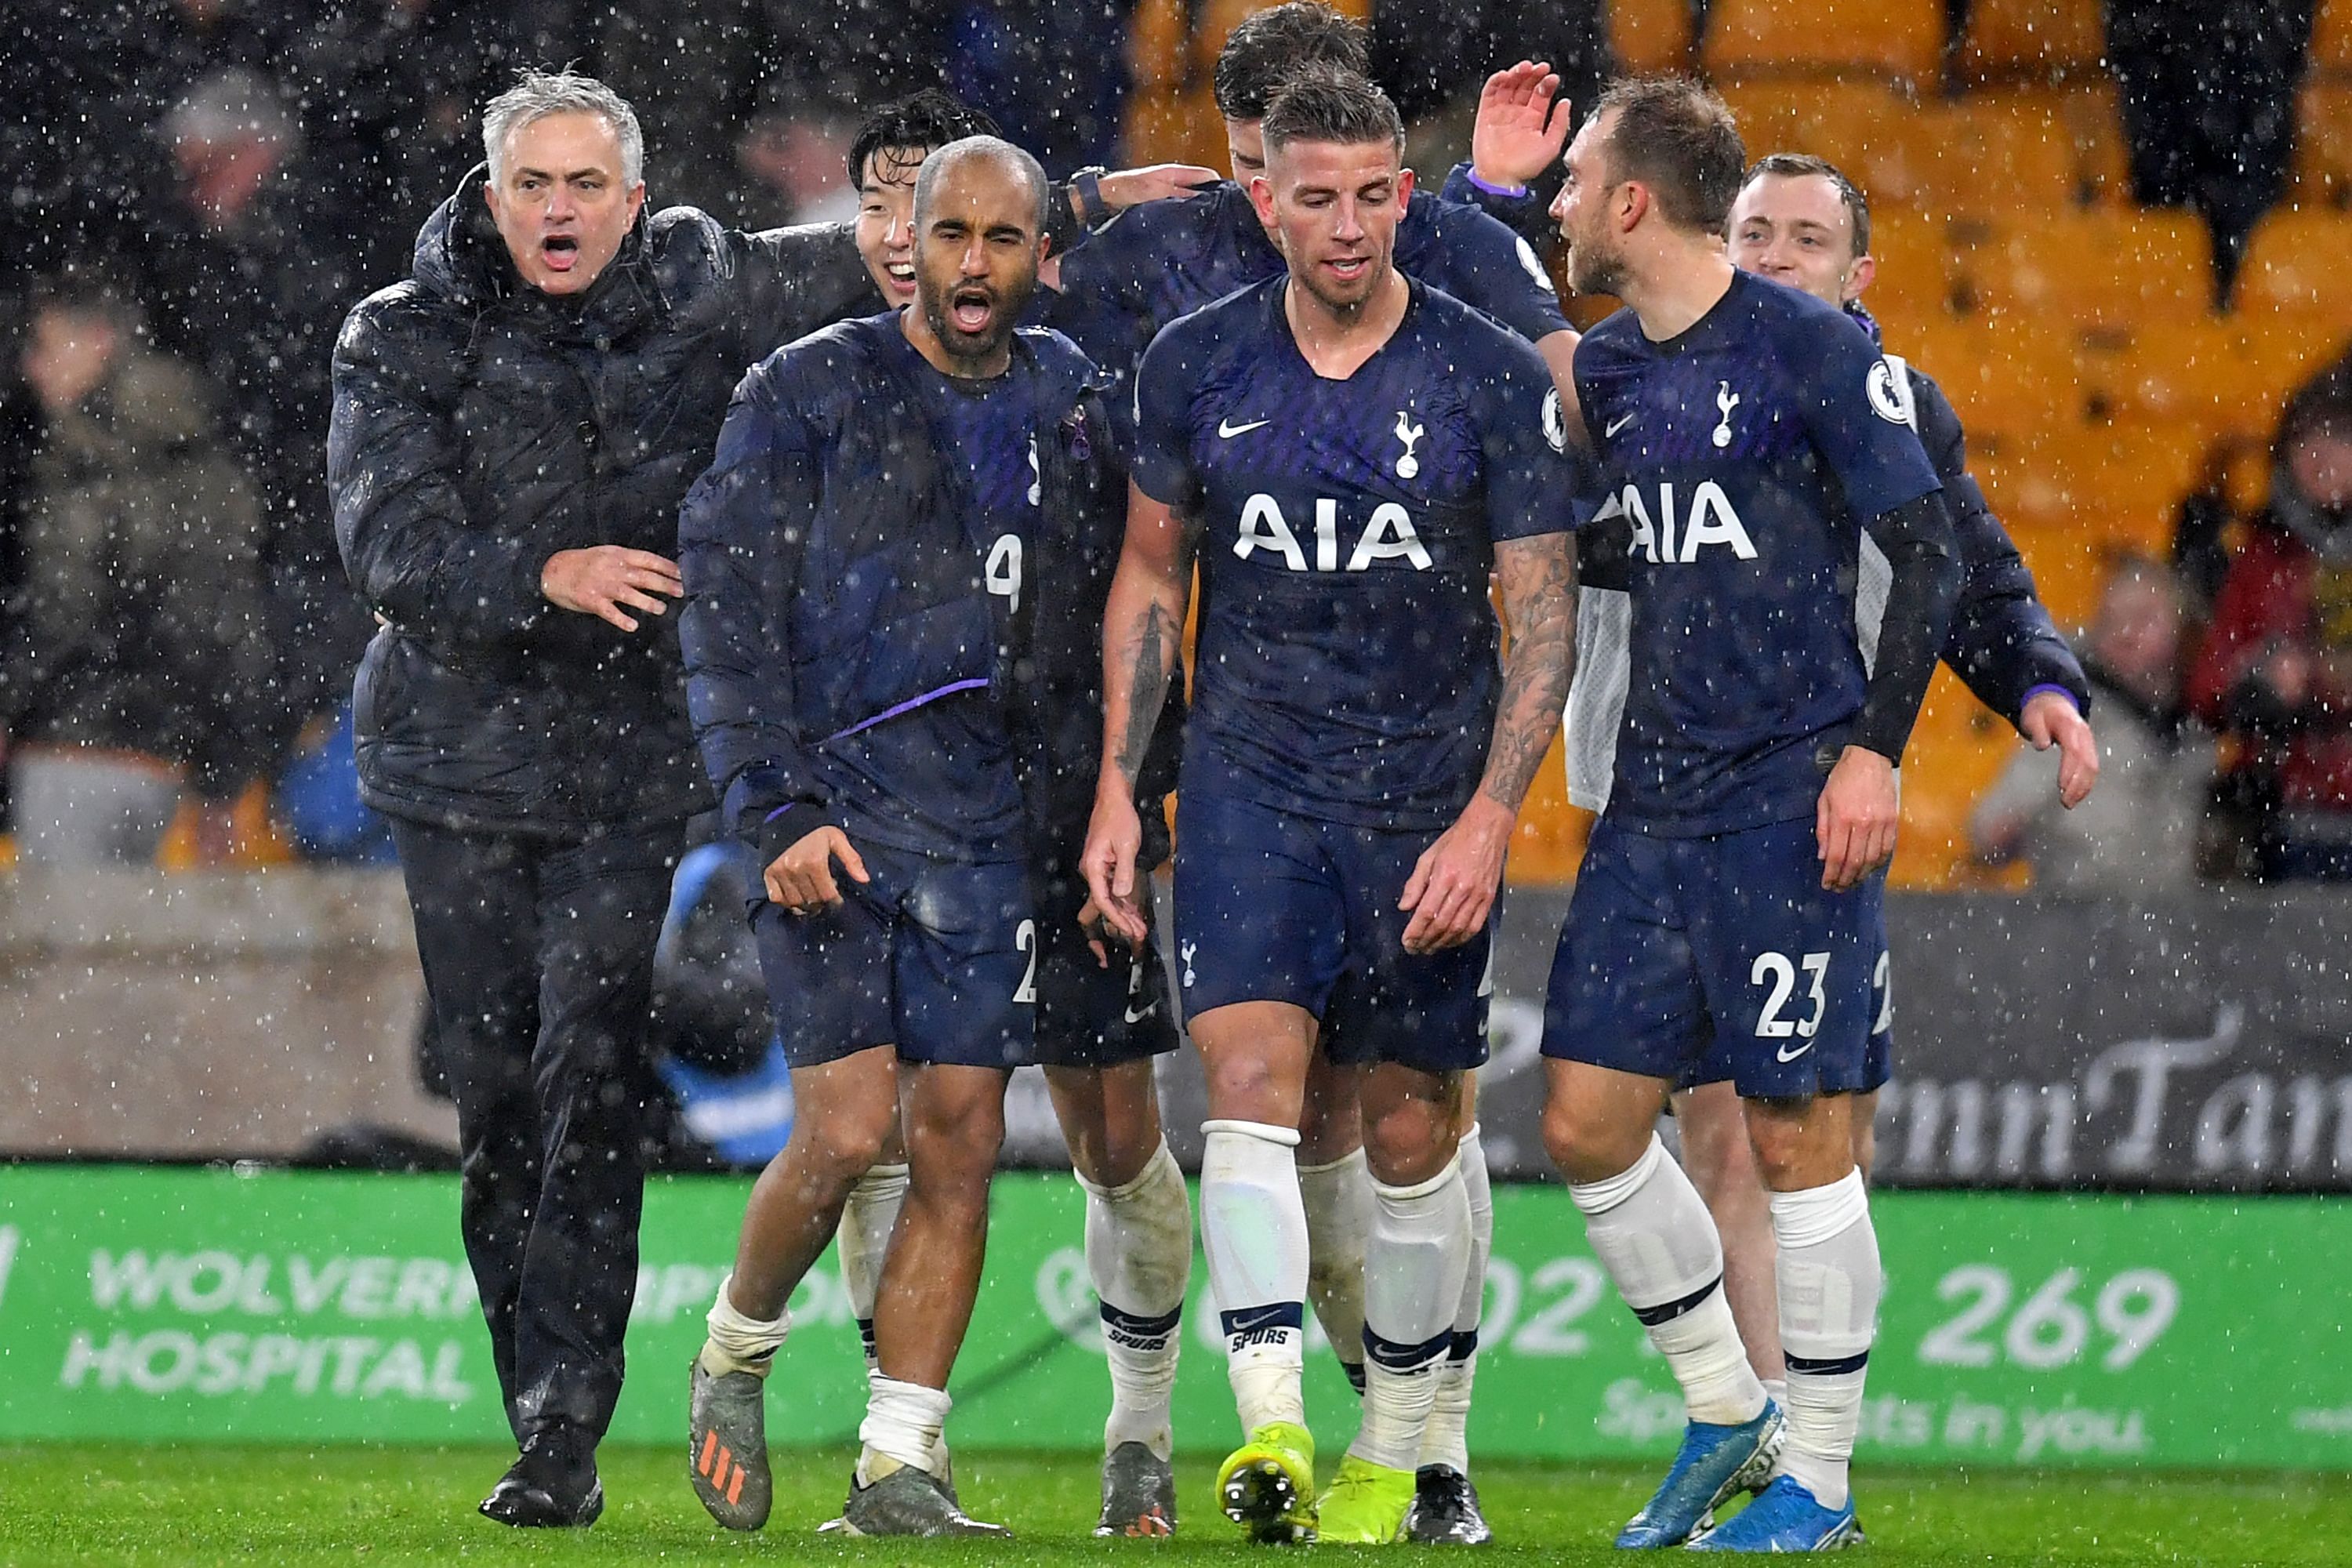 Tottenham Hotspur's Portuguese head coach Jose Mourinho (L) celebrates with his players on the pitch after the English Premier League football match between Wolverhampton Wanderers and Tottenham Hotspur at the Molineux stadium in Wolverhampton, central England. (AFP Photo)